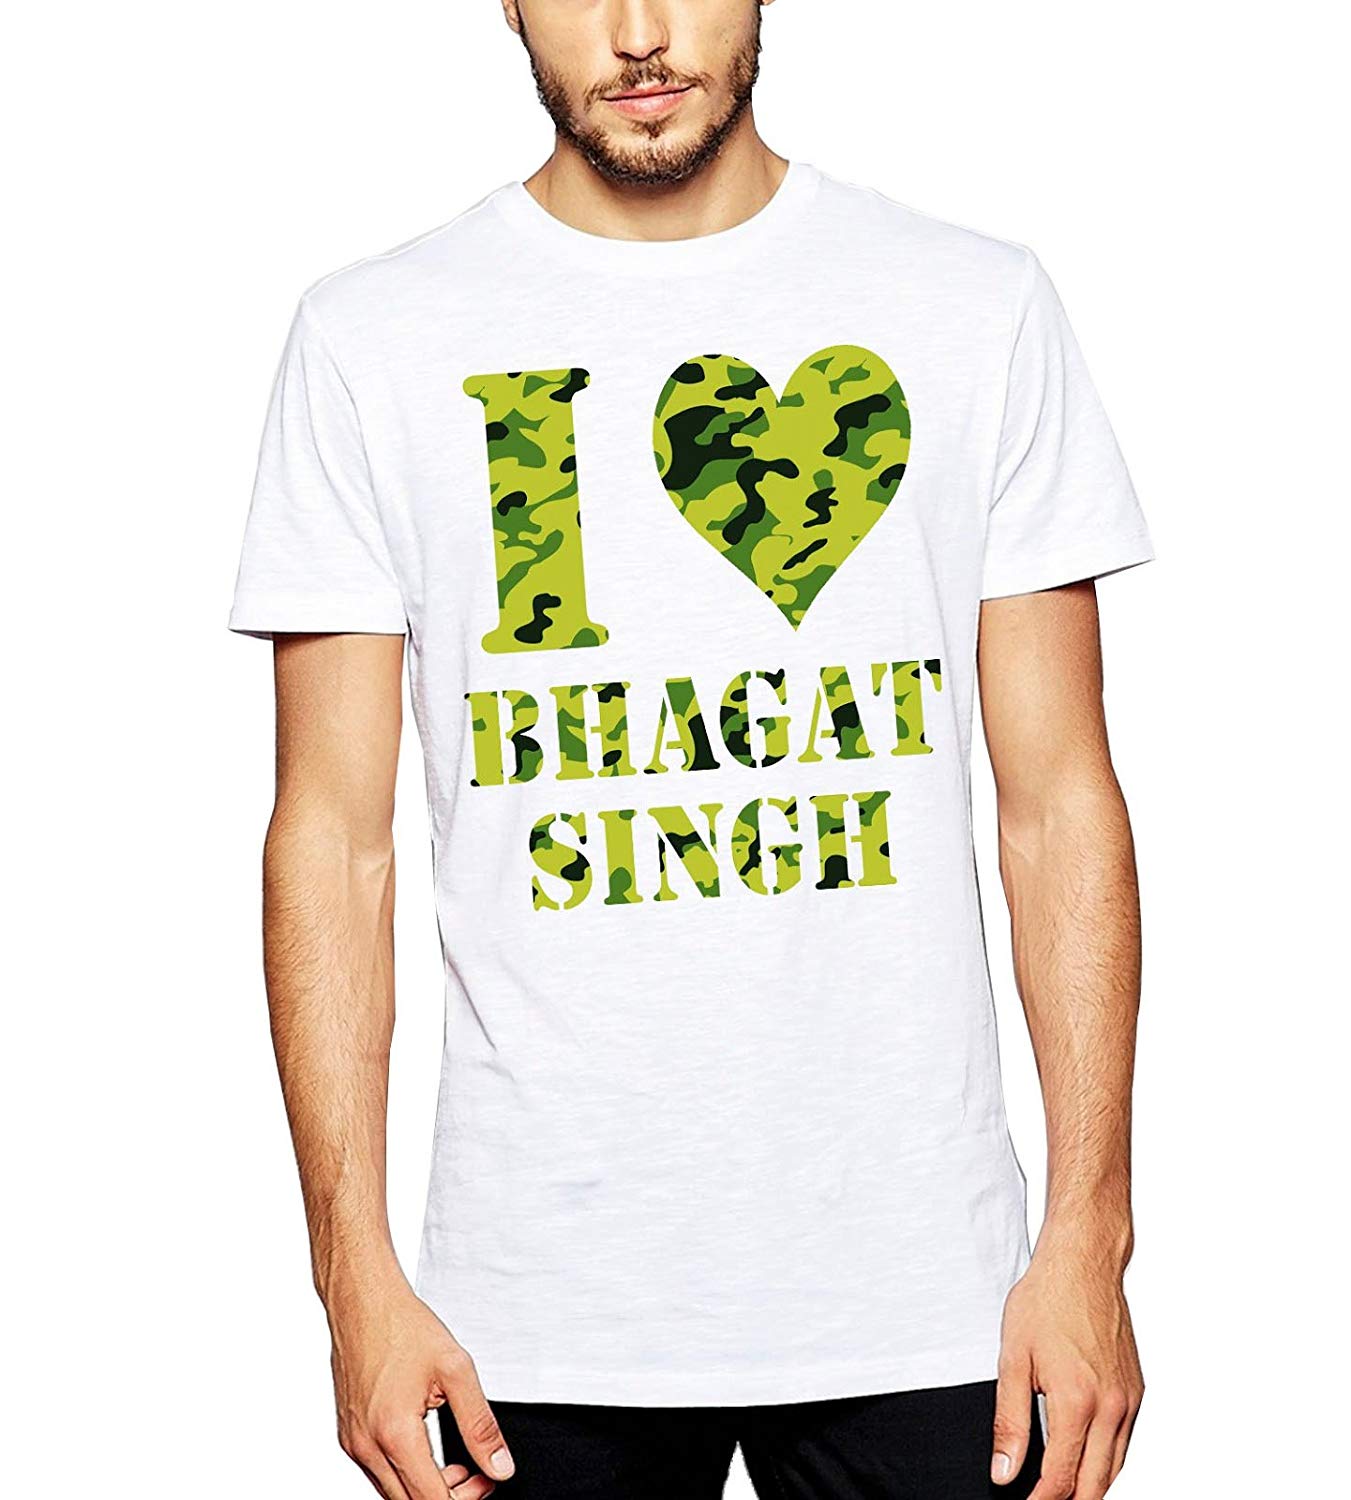 DOUBLE F ROUND NECK HALF SLEEVE WHITE COLOR I LOVE BHAGAT SINGH PRINTED T-SHIRT FOR MEN